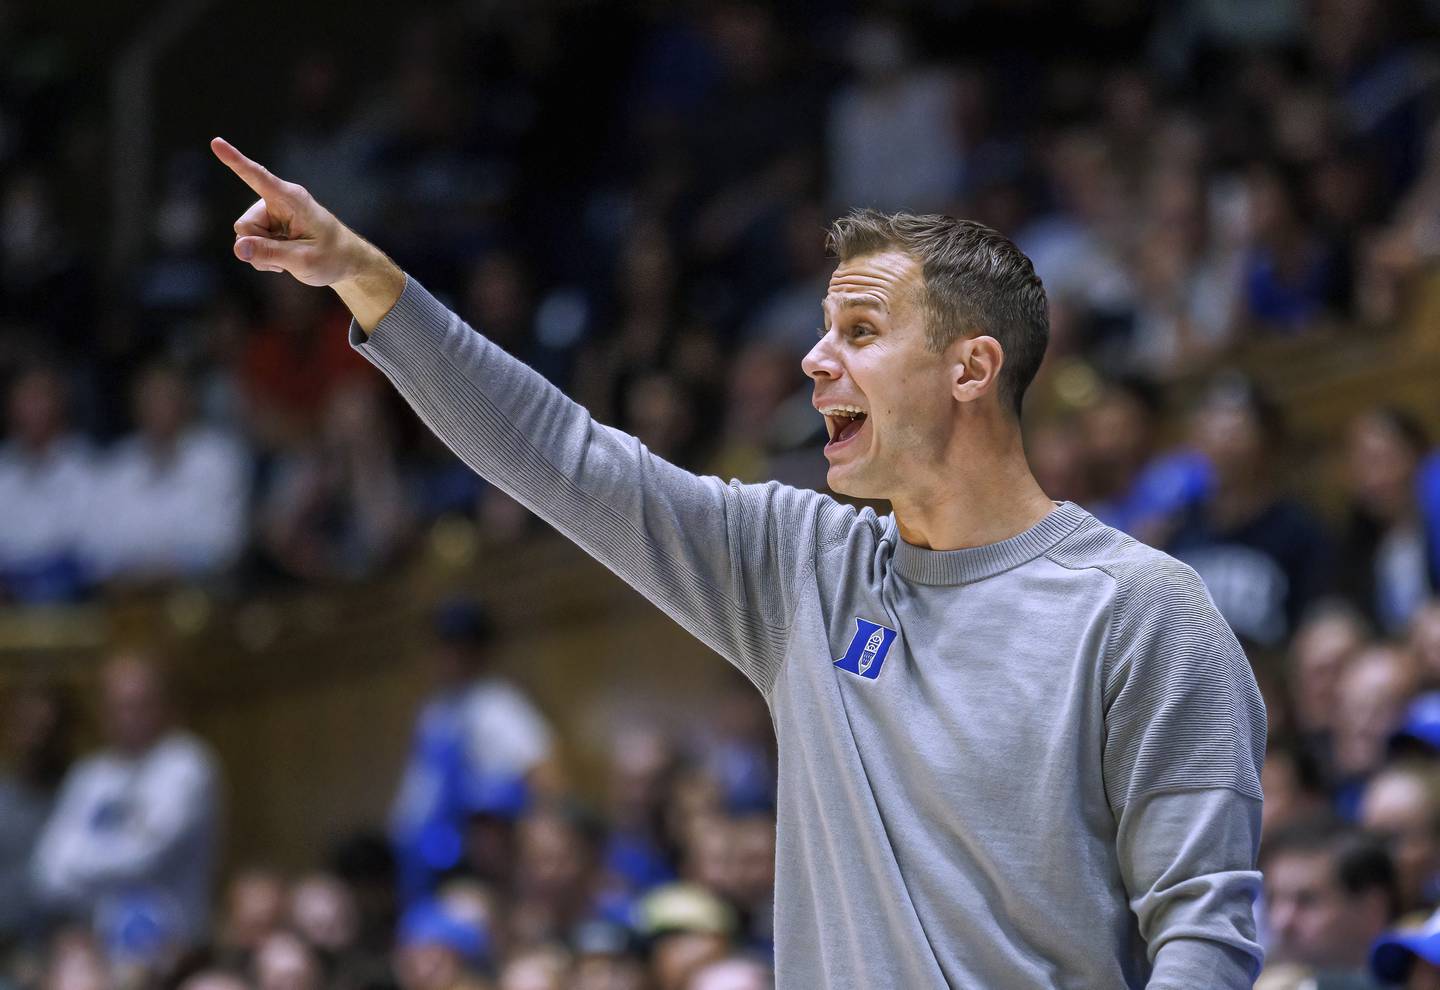 Duke coach Jon Scheyer gestures to players during the second half of a game on Nov. 11, 2022.